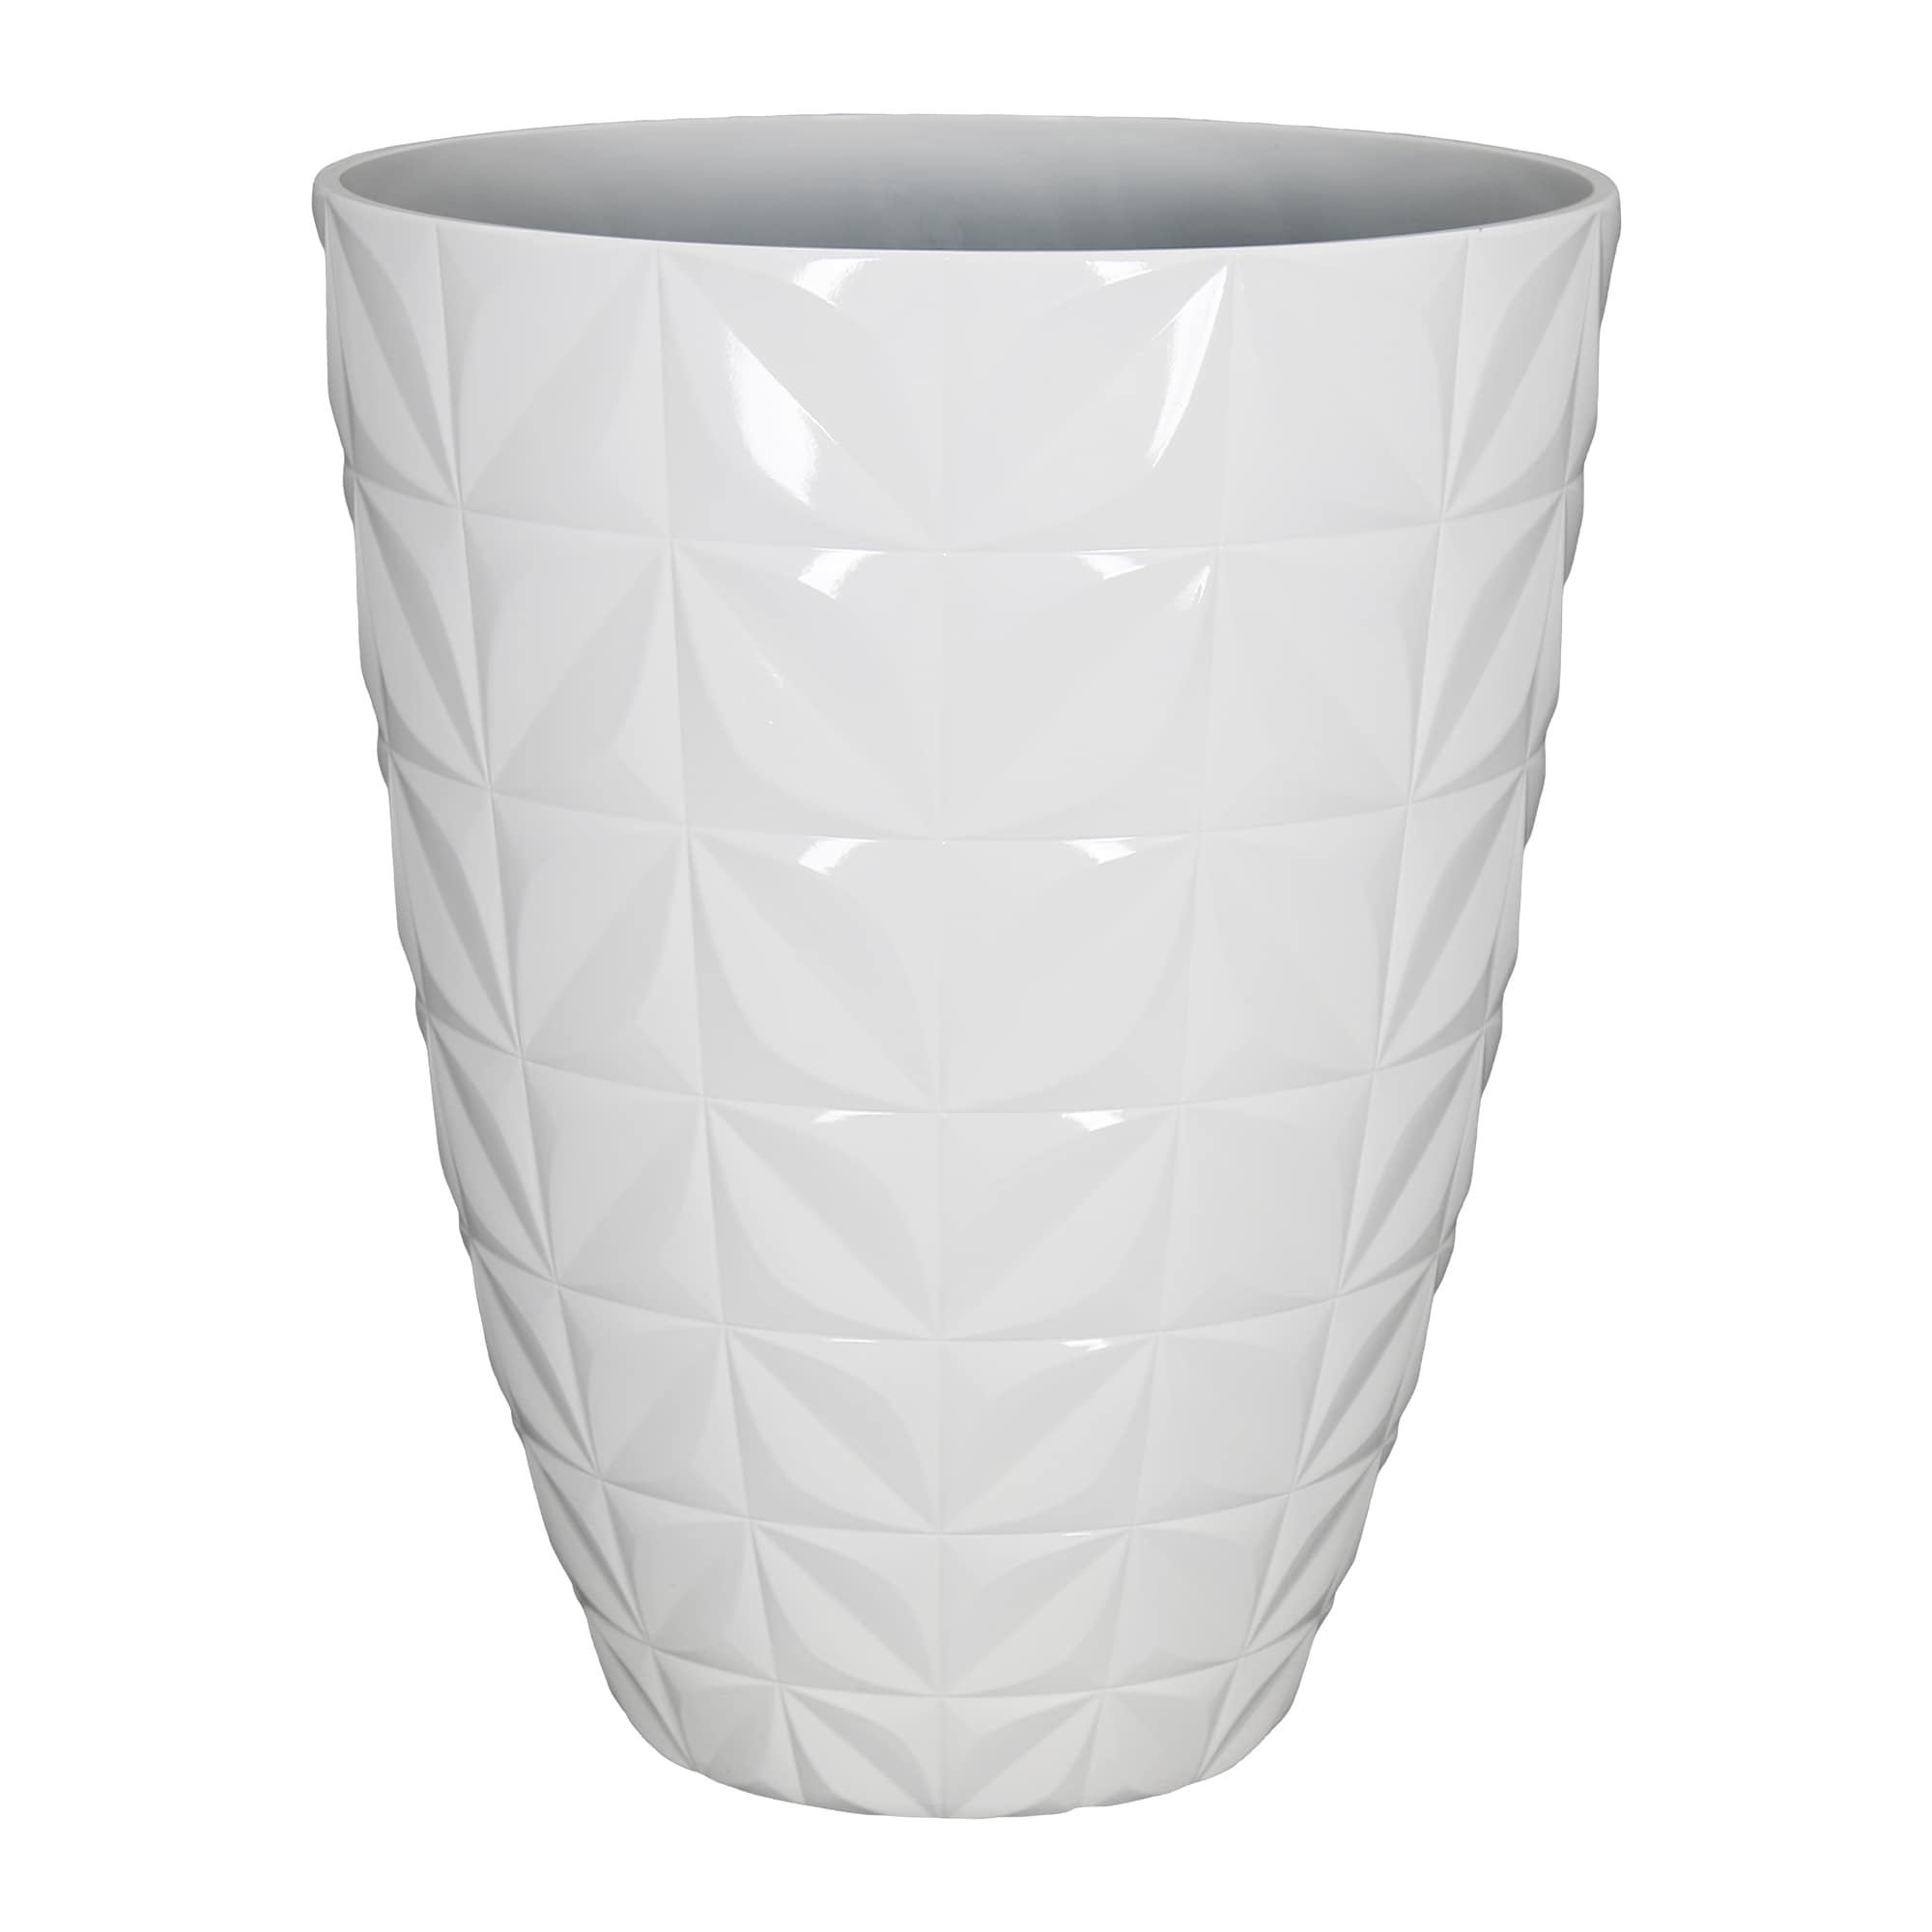 15.16-in W x 19.76-in H White Resin Contemporary/Modern Indoor/Outdoor Planter | - allen + roth PLG6516PWG